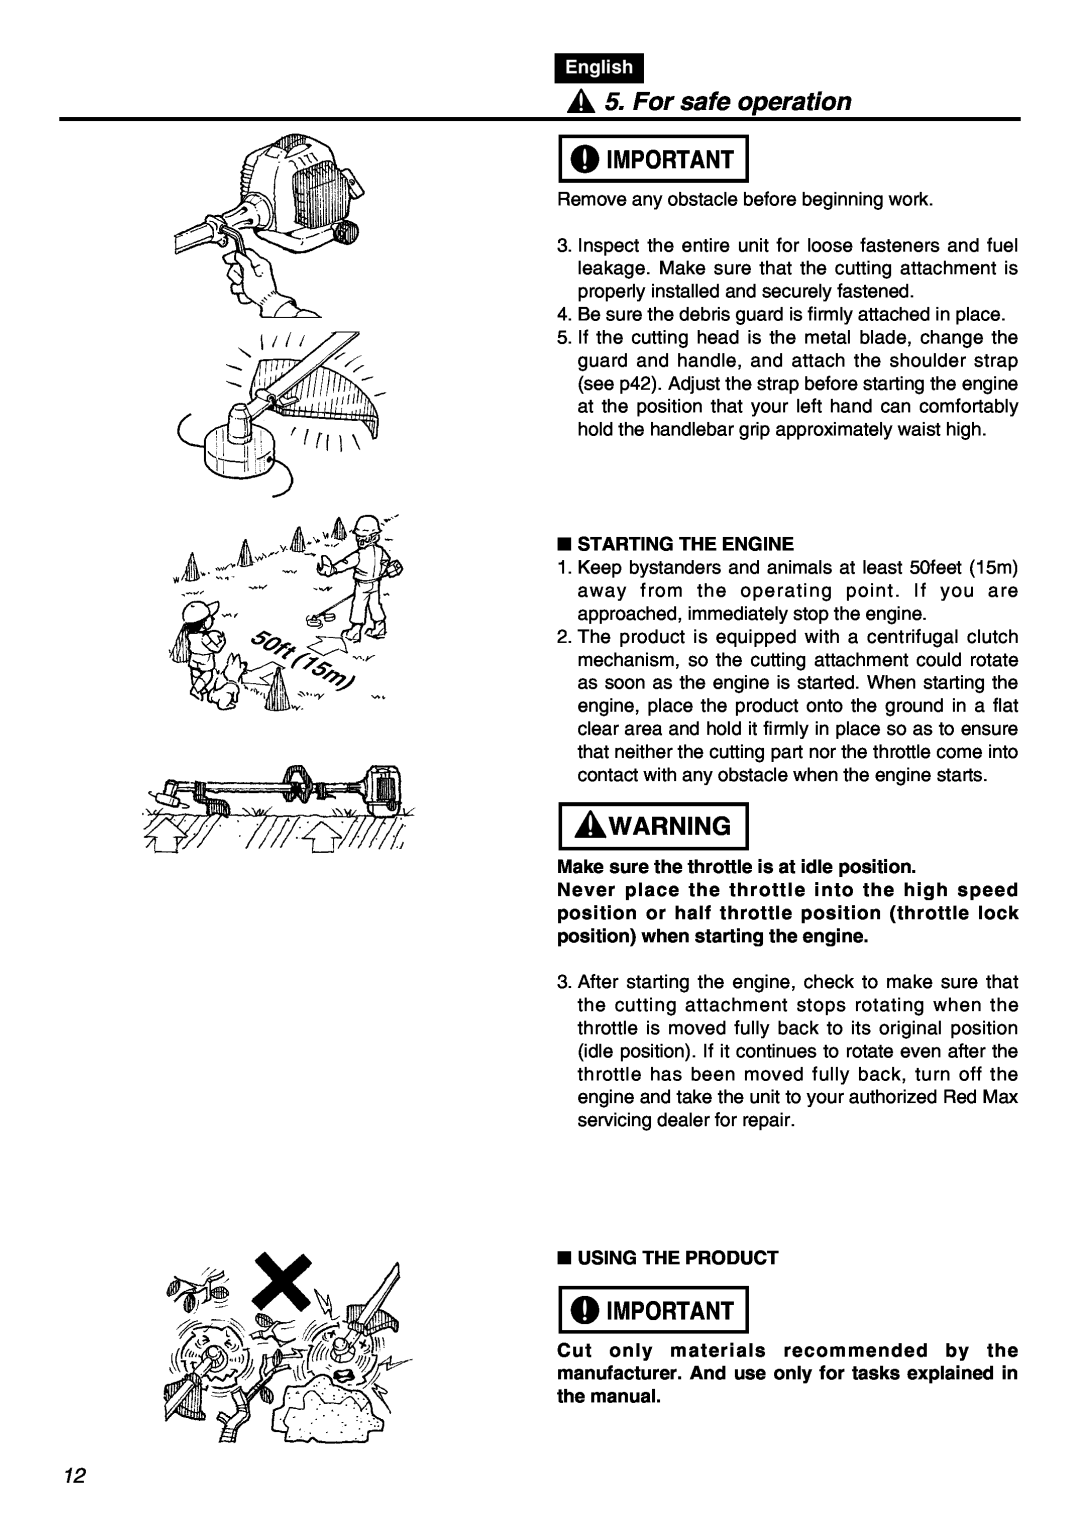 Zenoah TR2301S manual For safe operation, English, Starting The Engine, Make sure the throttle is at idle position 